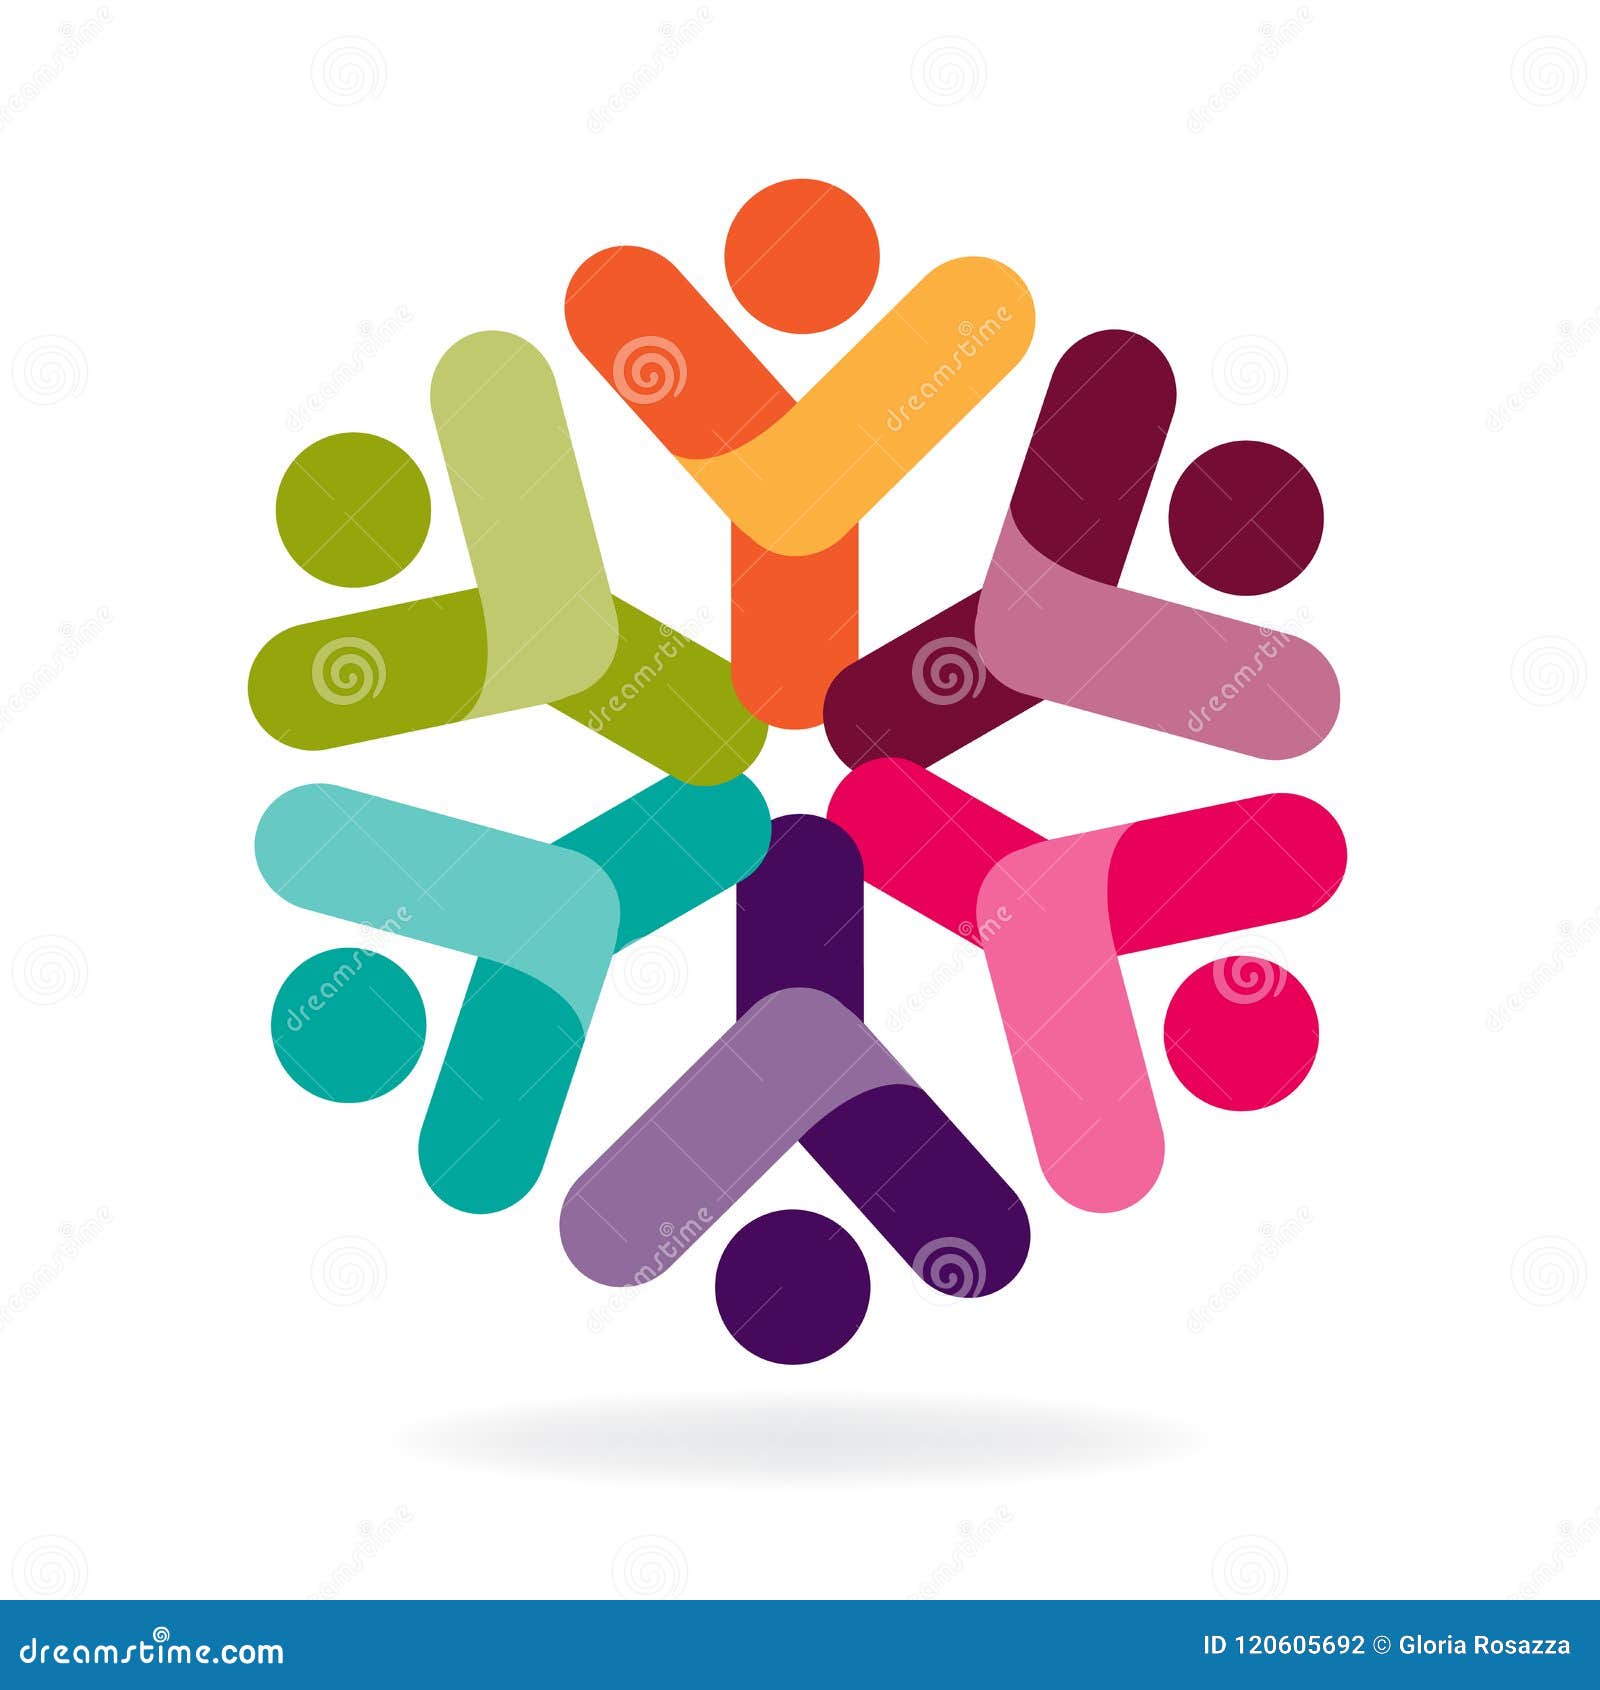 logo teamwork happy partners friendship unity business colorful people hands up icon